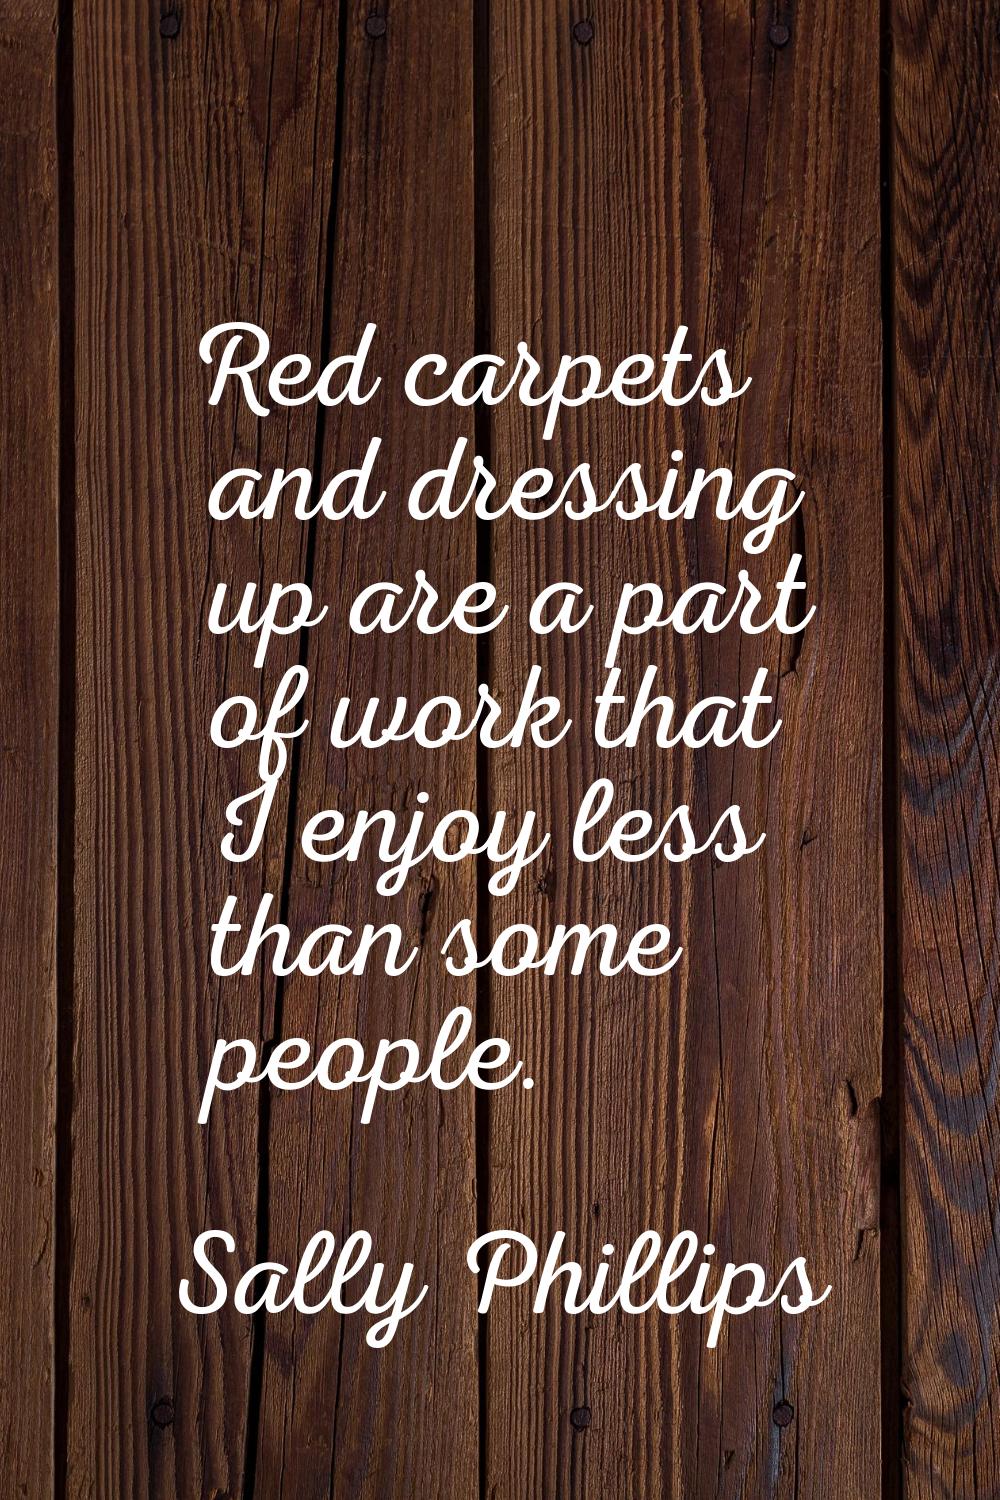 Red carpets and dressing up are a part of work that I enjoy less than some people.